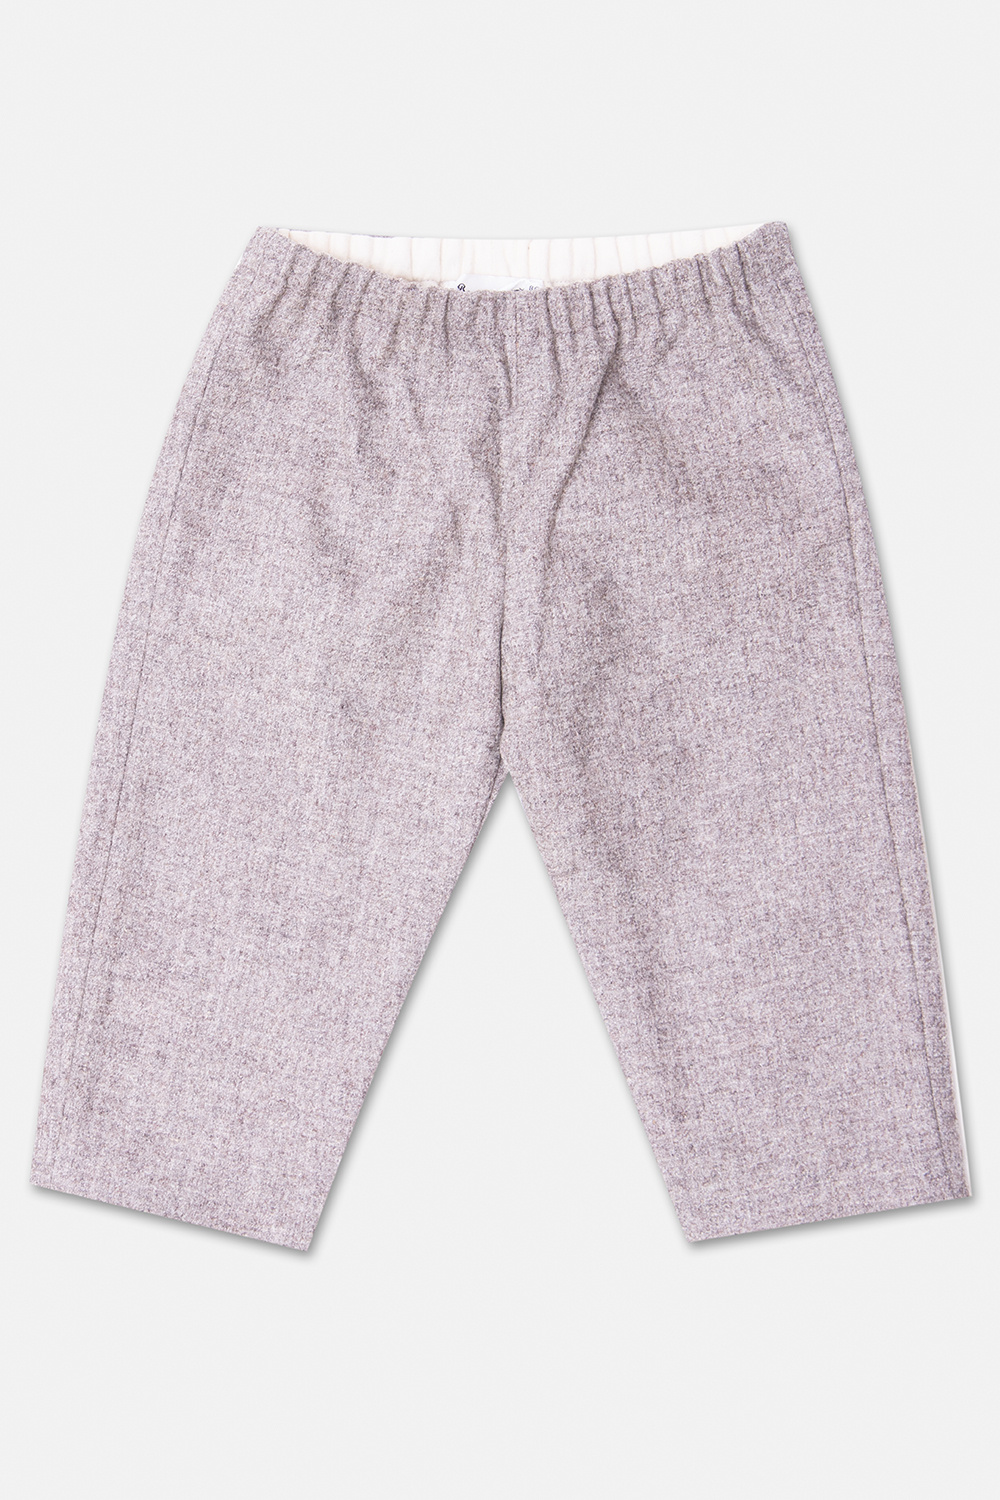 Bonpoint  Wool trousers